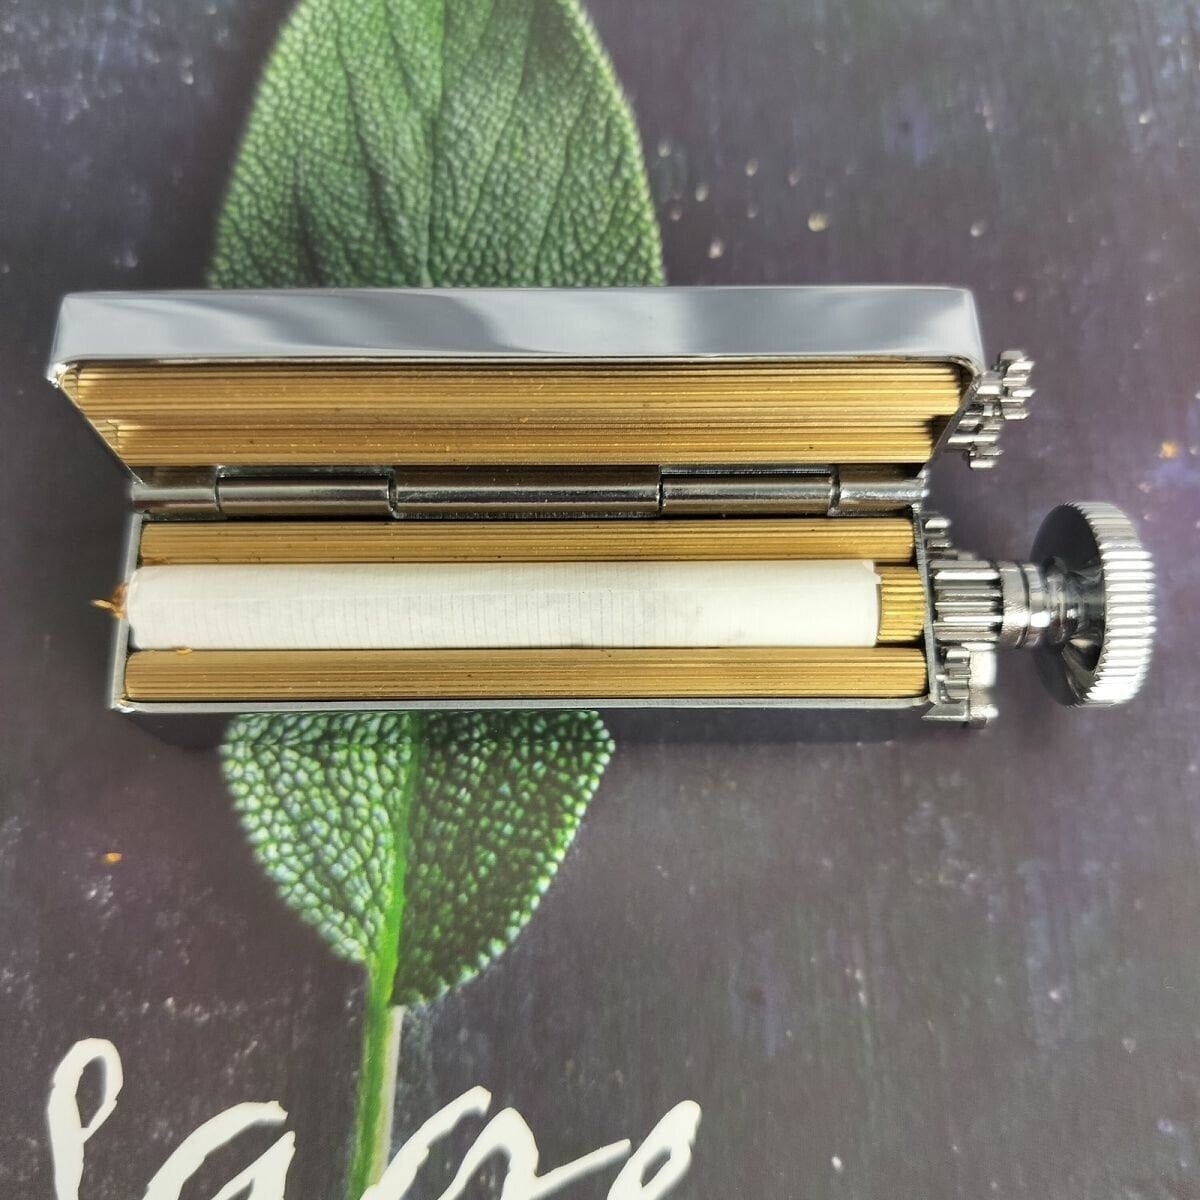 The Original Rollie Solid Chromium All Hand-made Vintage Cigarette Roller, Cigarette Rolling Machine, 70mm